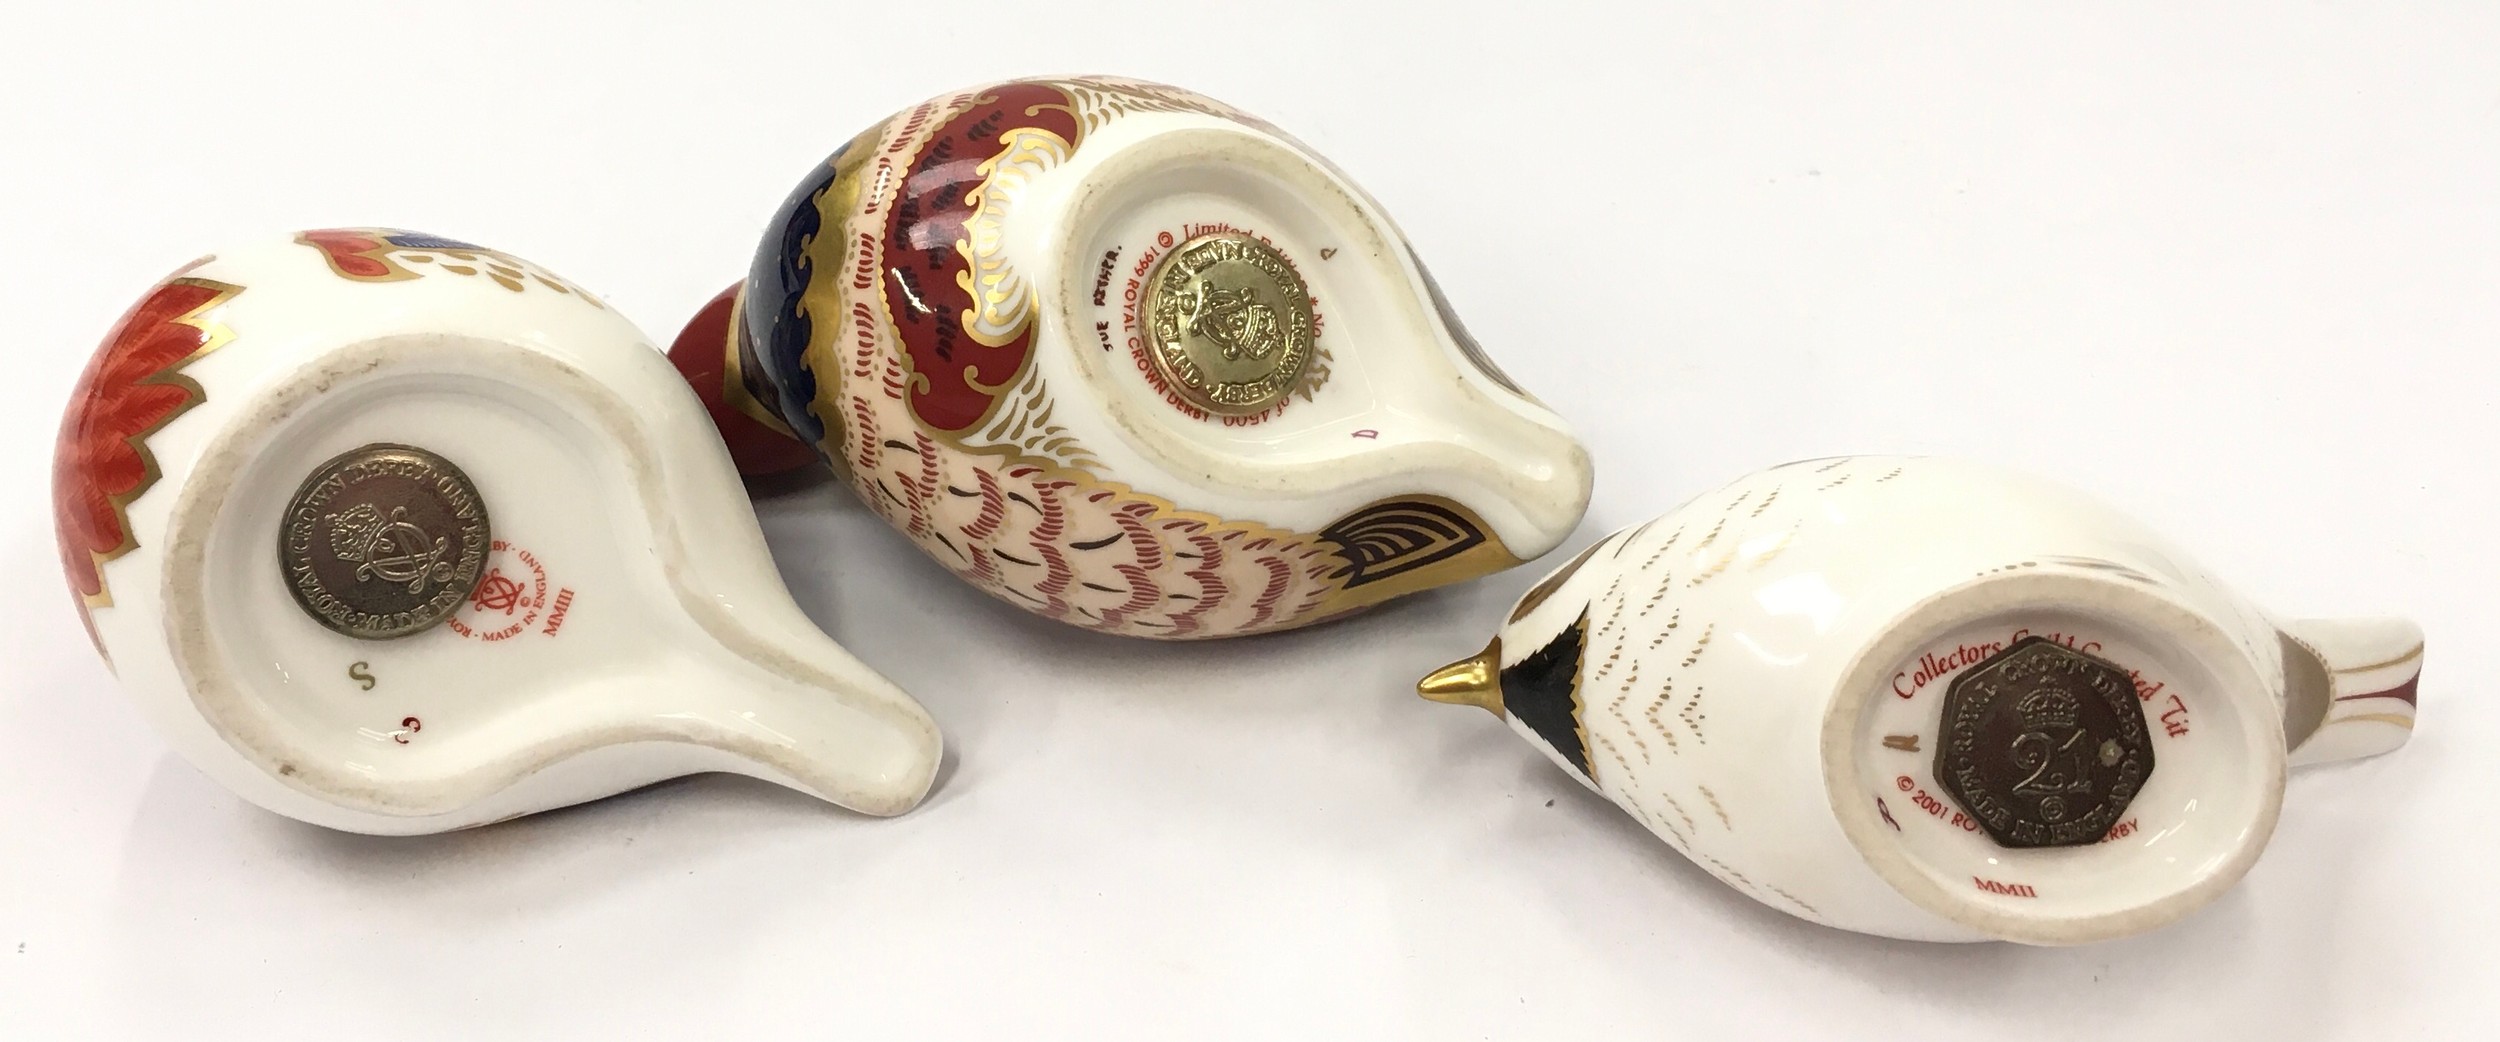 Royal crown Derby collection of bird paperweights (3). - Image 4 of 4